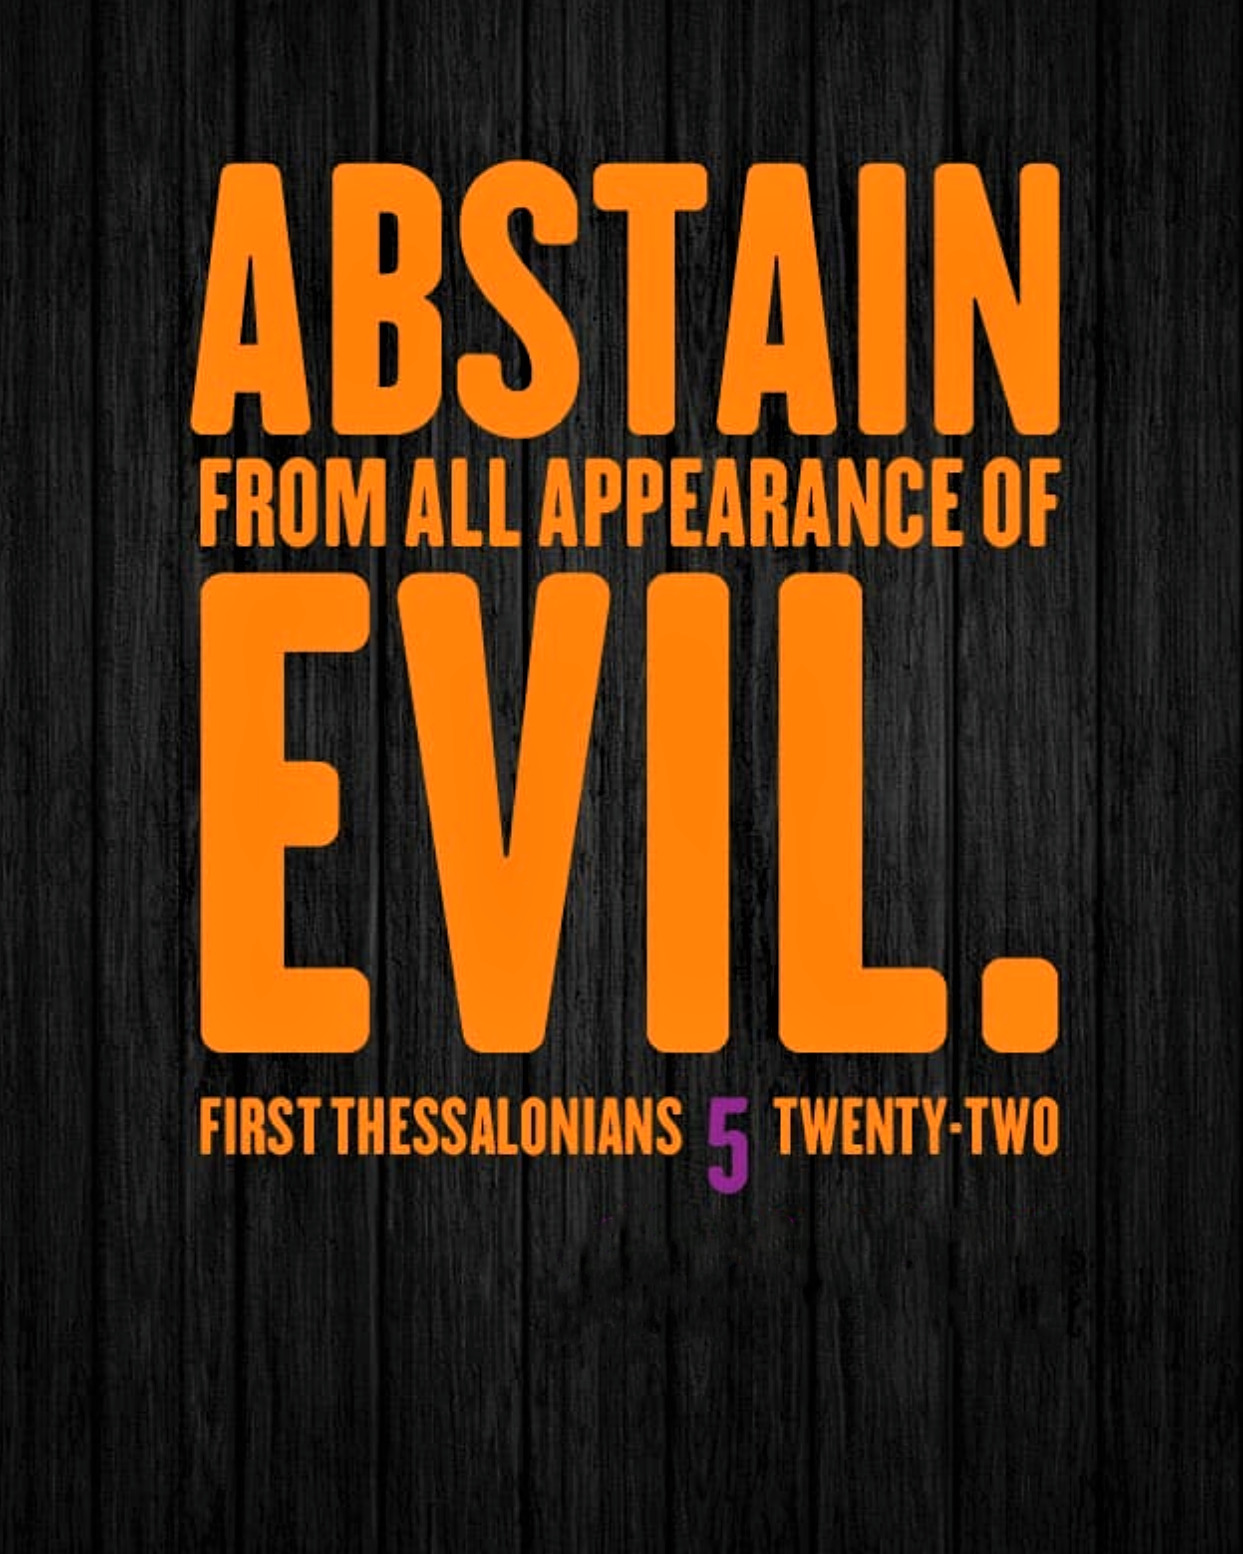 The Living... — 1 Thessalonians 5:22 (KJV) - Abstain from all...